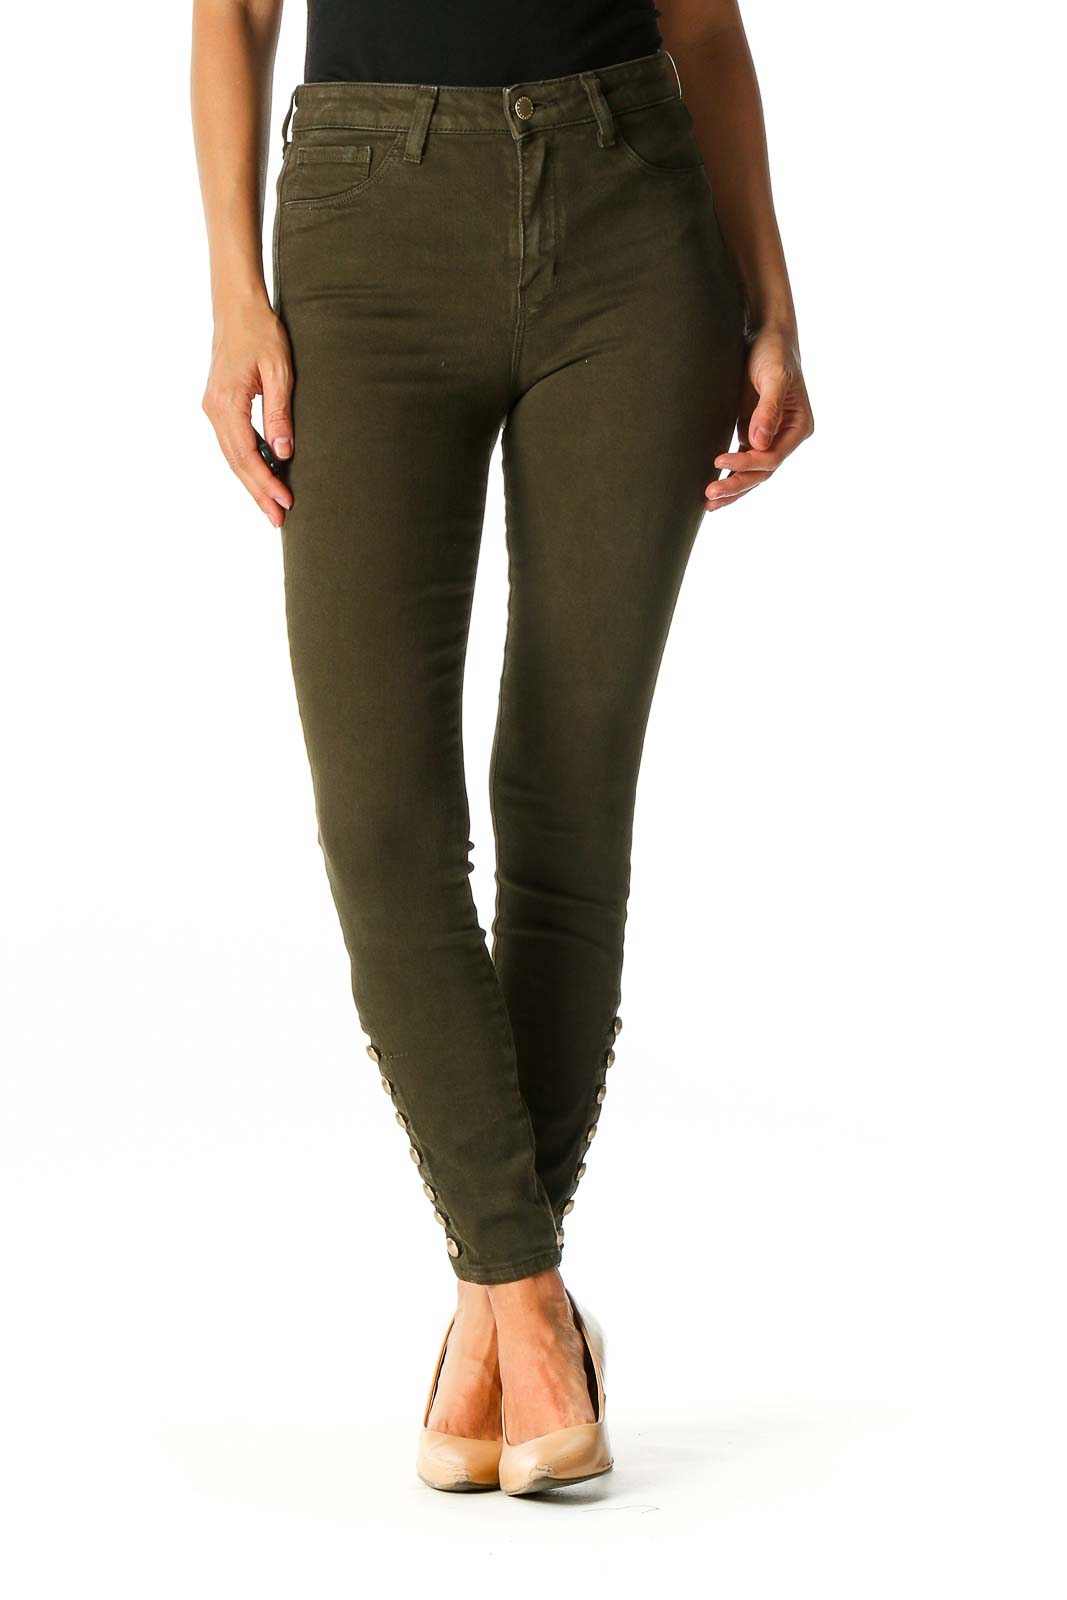 Green Chic Skinny Jeans Front